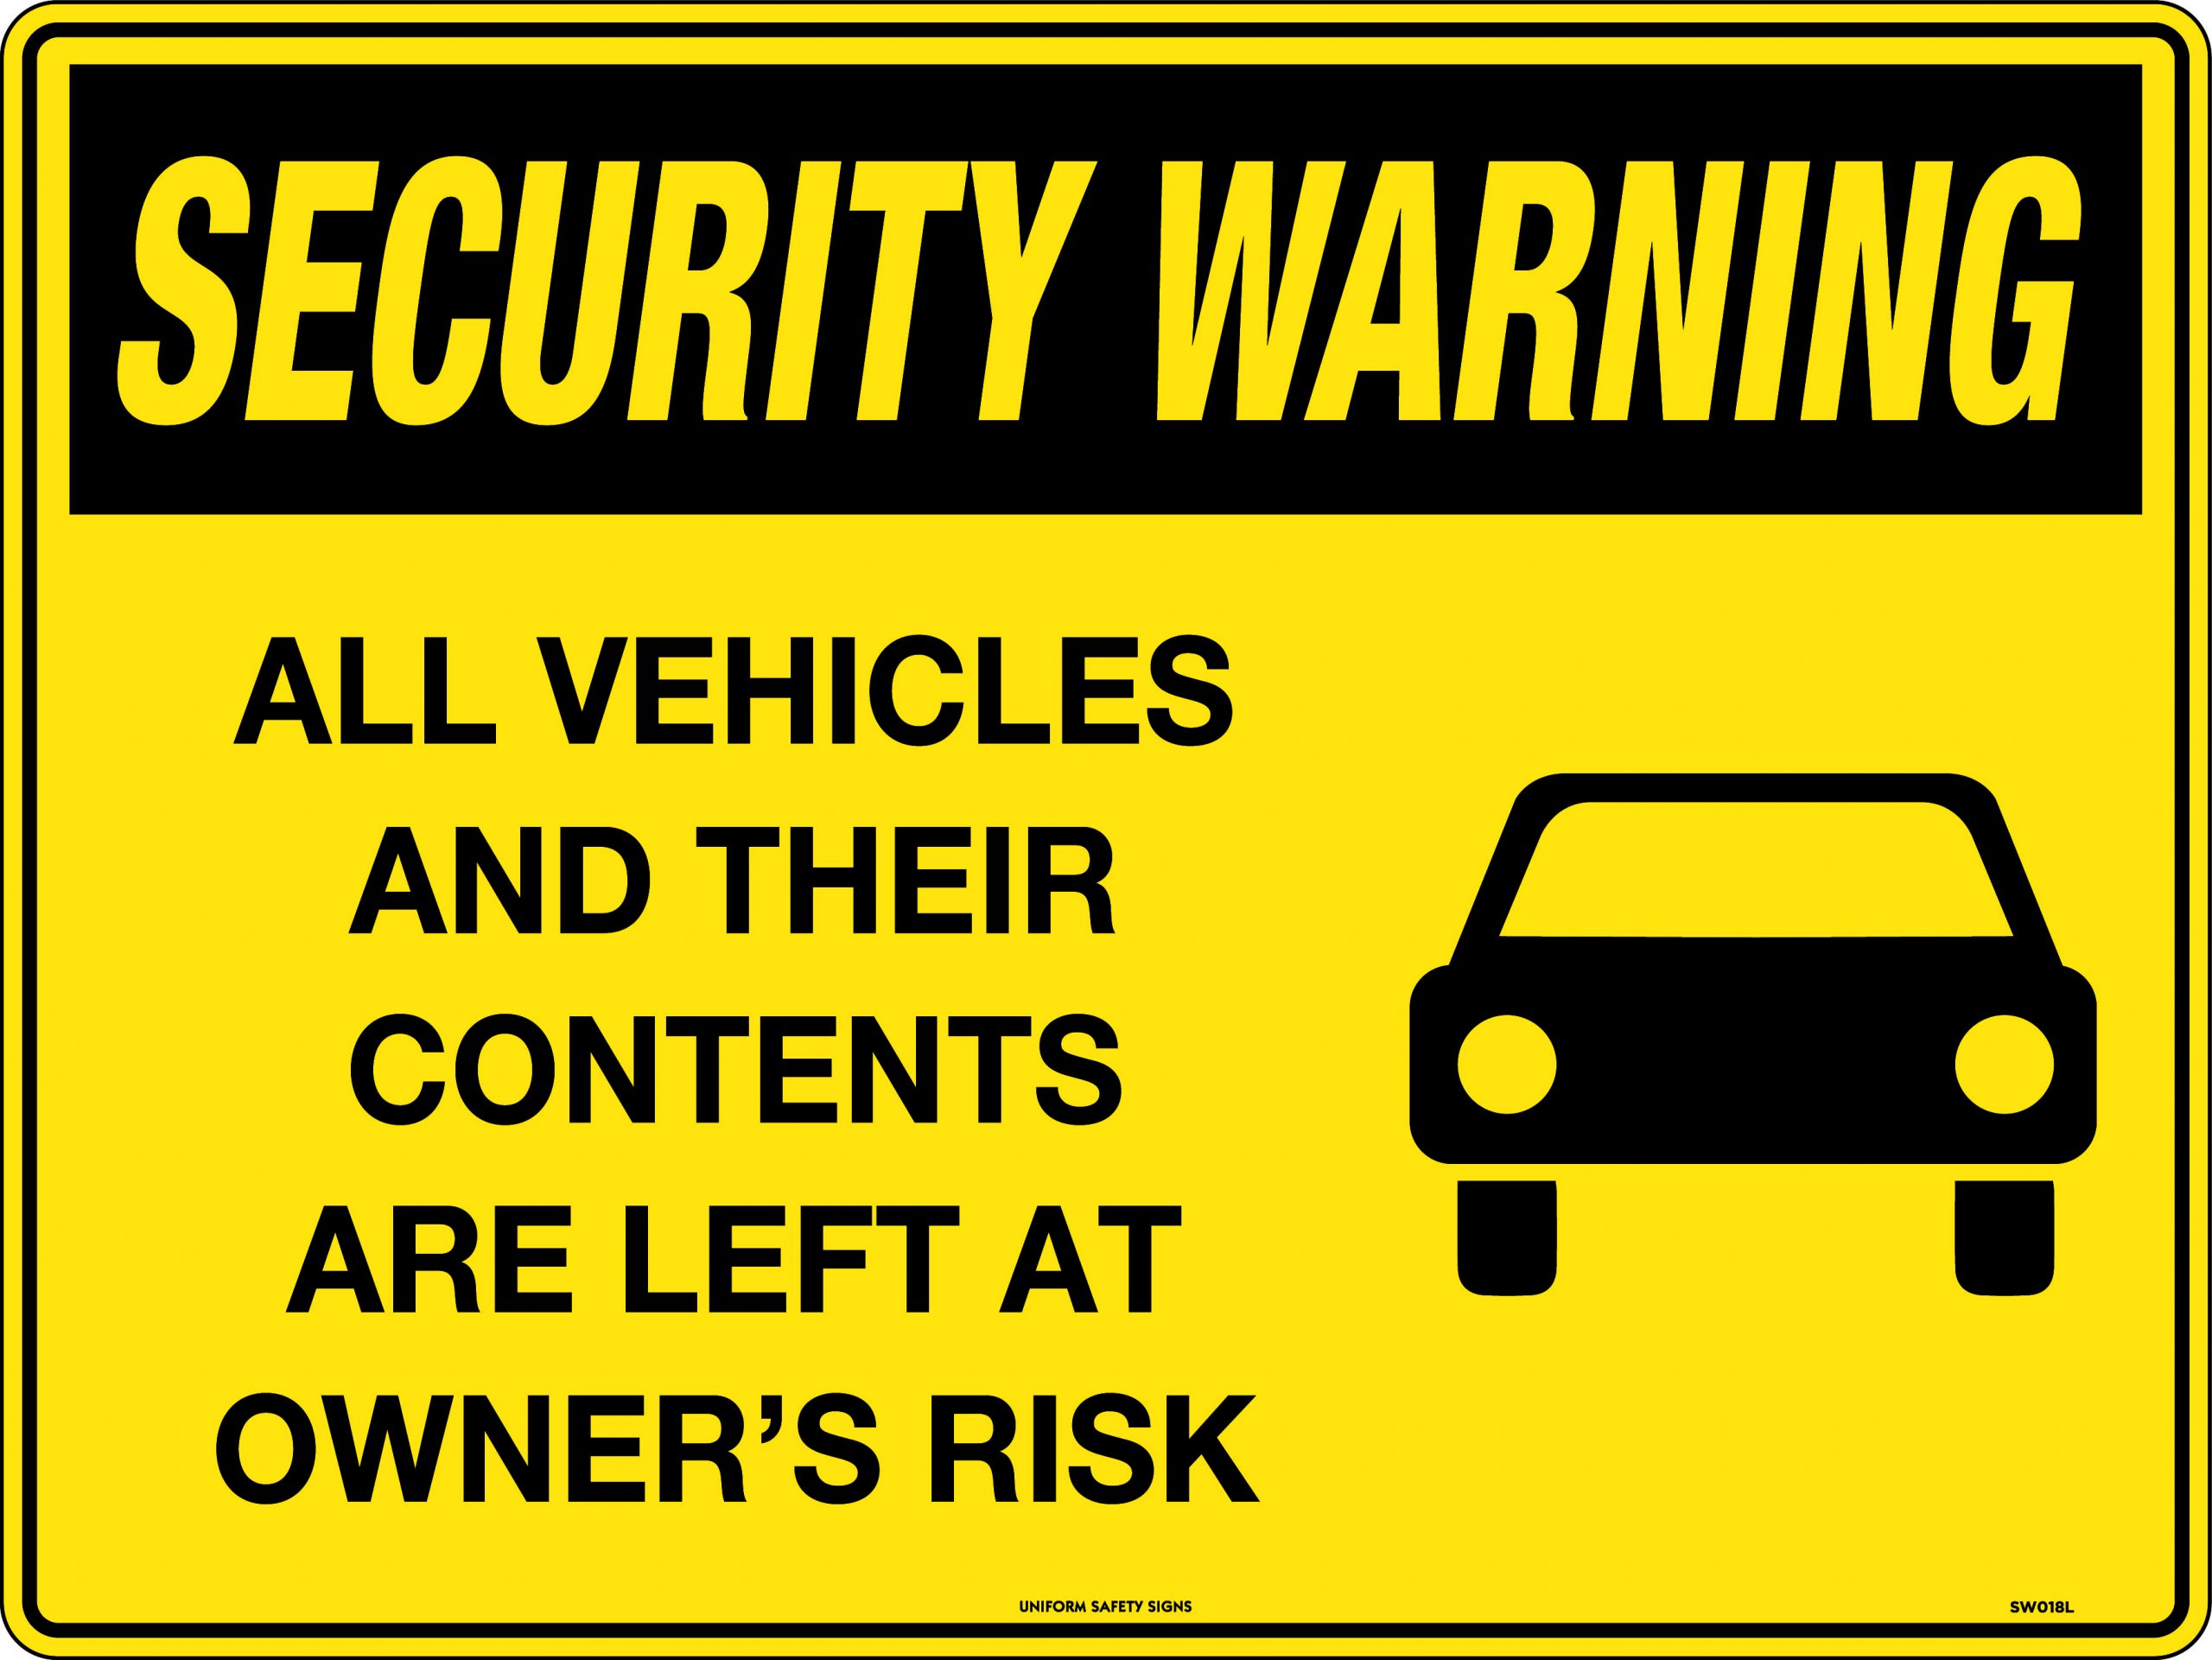 UNIFORM SAFETY 450X300MM METAL SEC WARNING ALL VEHICLES AND THEIR